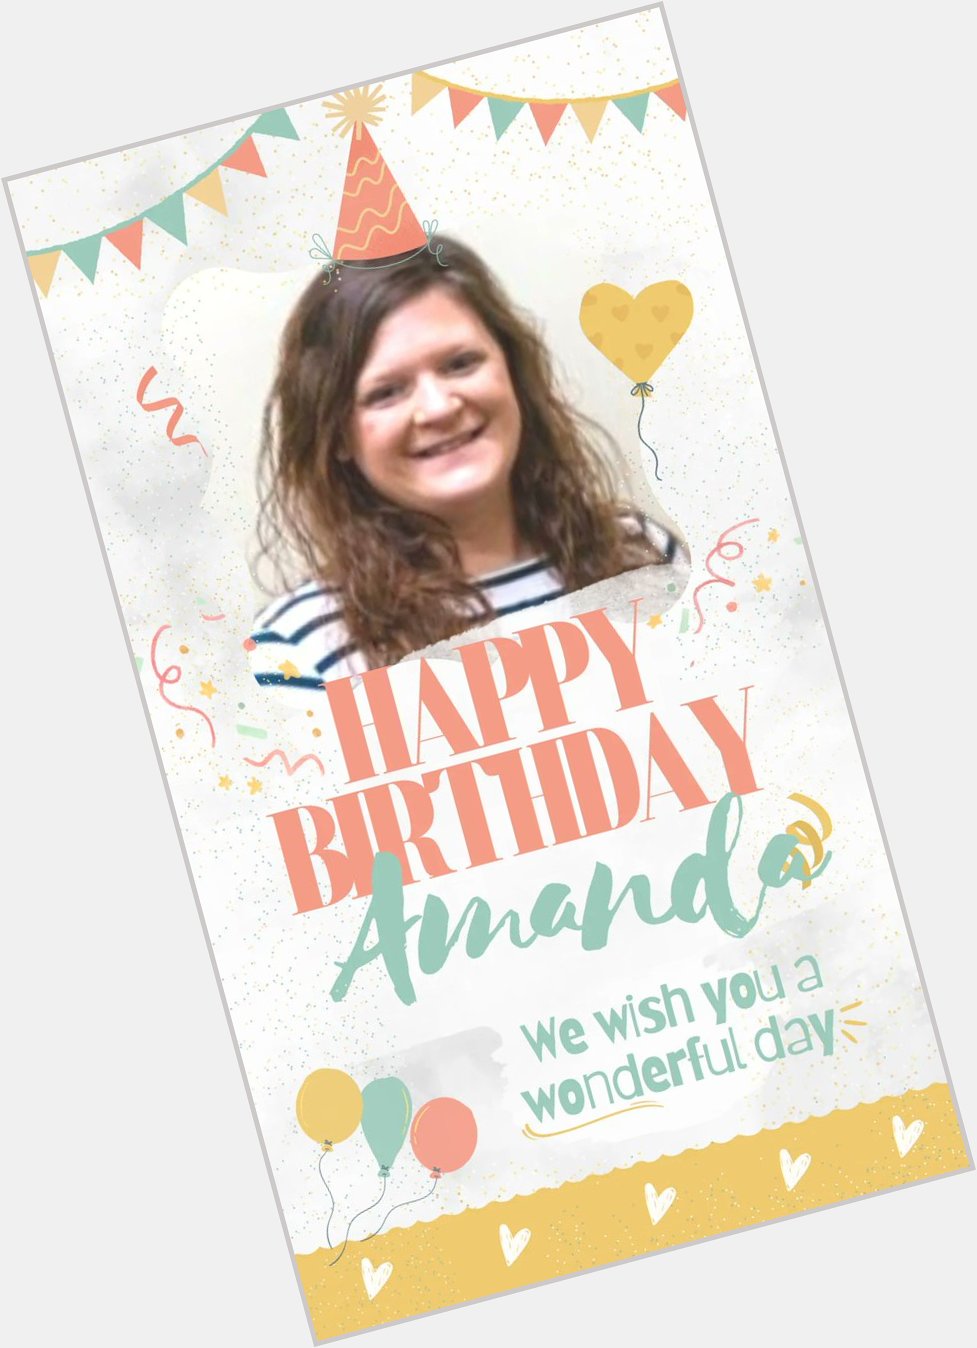 Happy Birthday to our Operation\s Manager Amanda!! Hope you have an awesome day! 